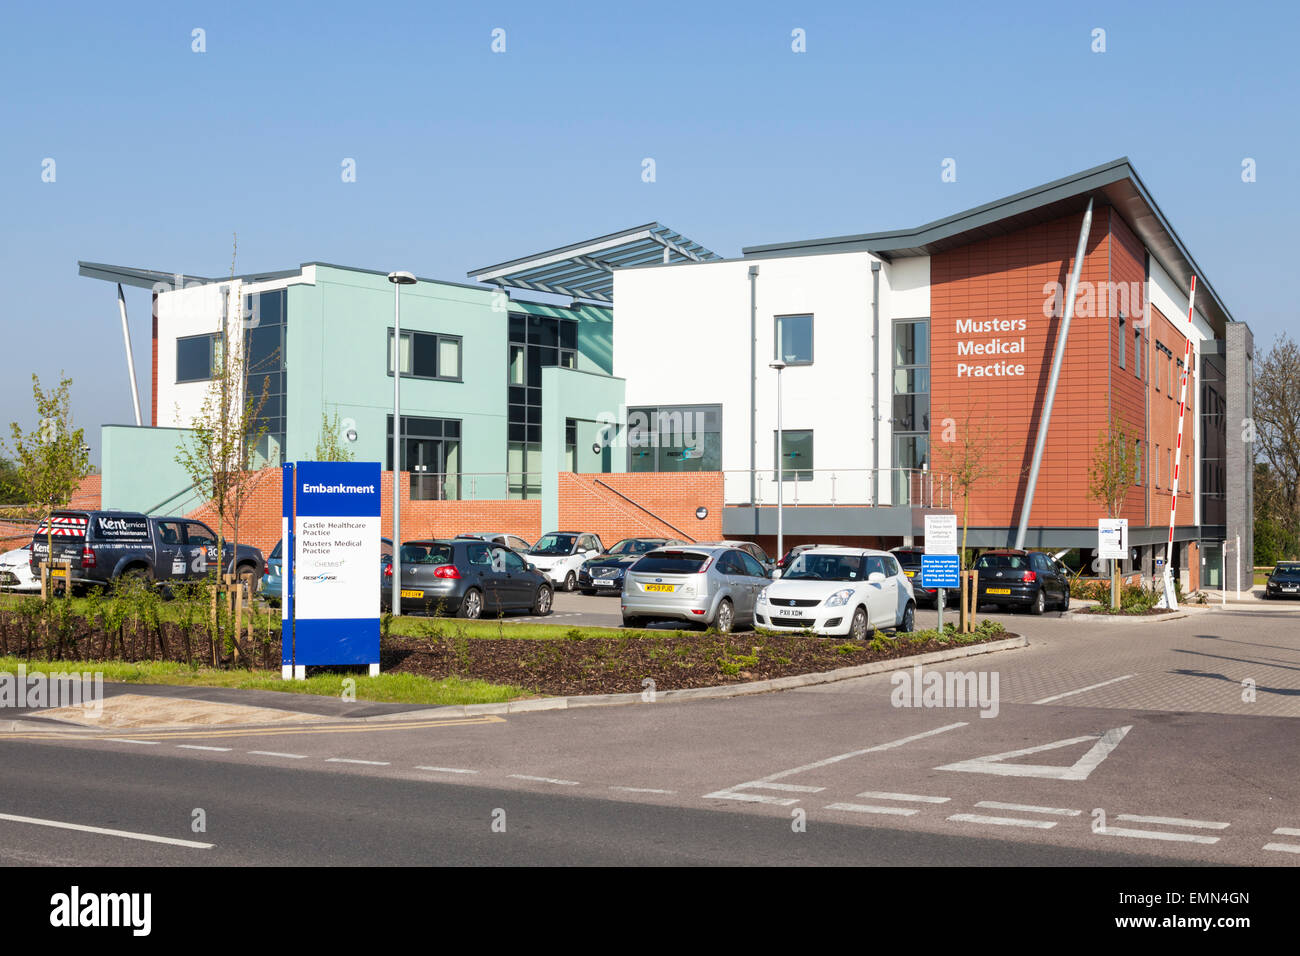 Musters Medical Practice and Castle Healthcare Practice at Embankment Primary Care, West Bridgford, Nottinghamshire, England, UK Stock Photo